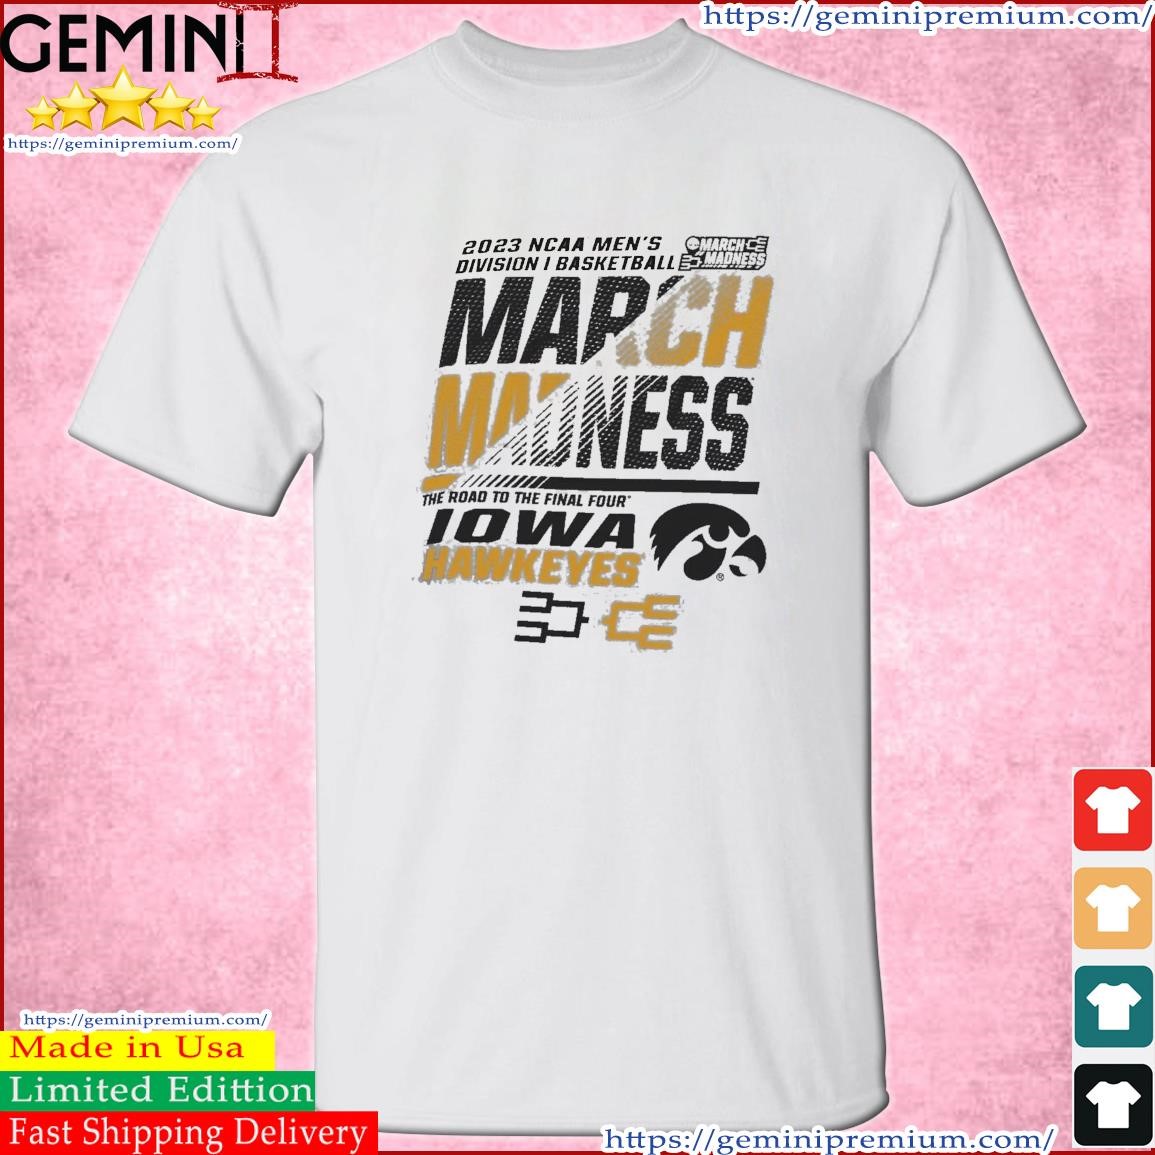 Iowa Hawkeyes Men's Basketball 2023 NCAA March Madness The Road To Final Four Shirt